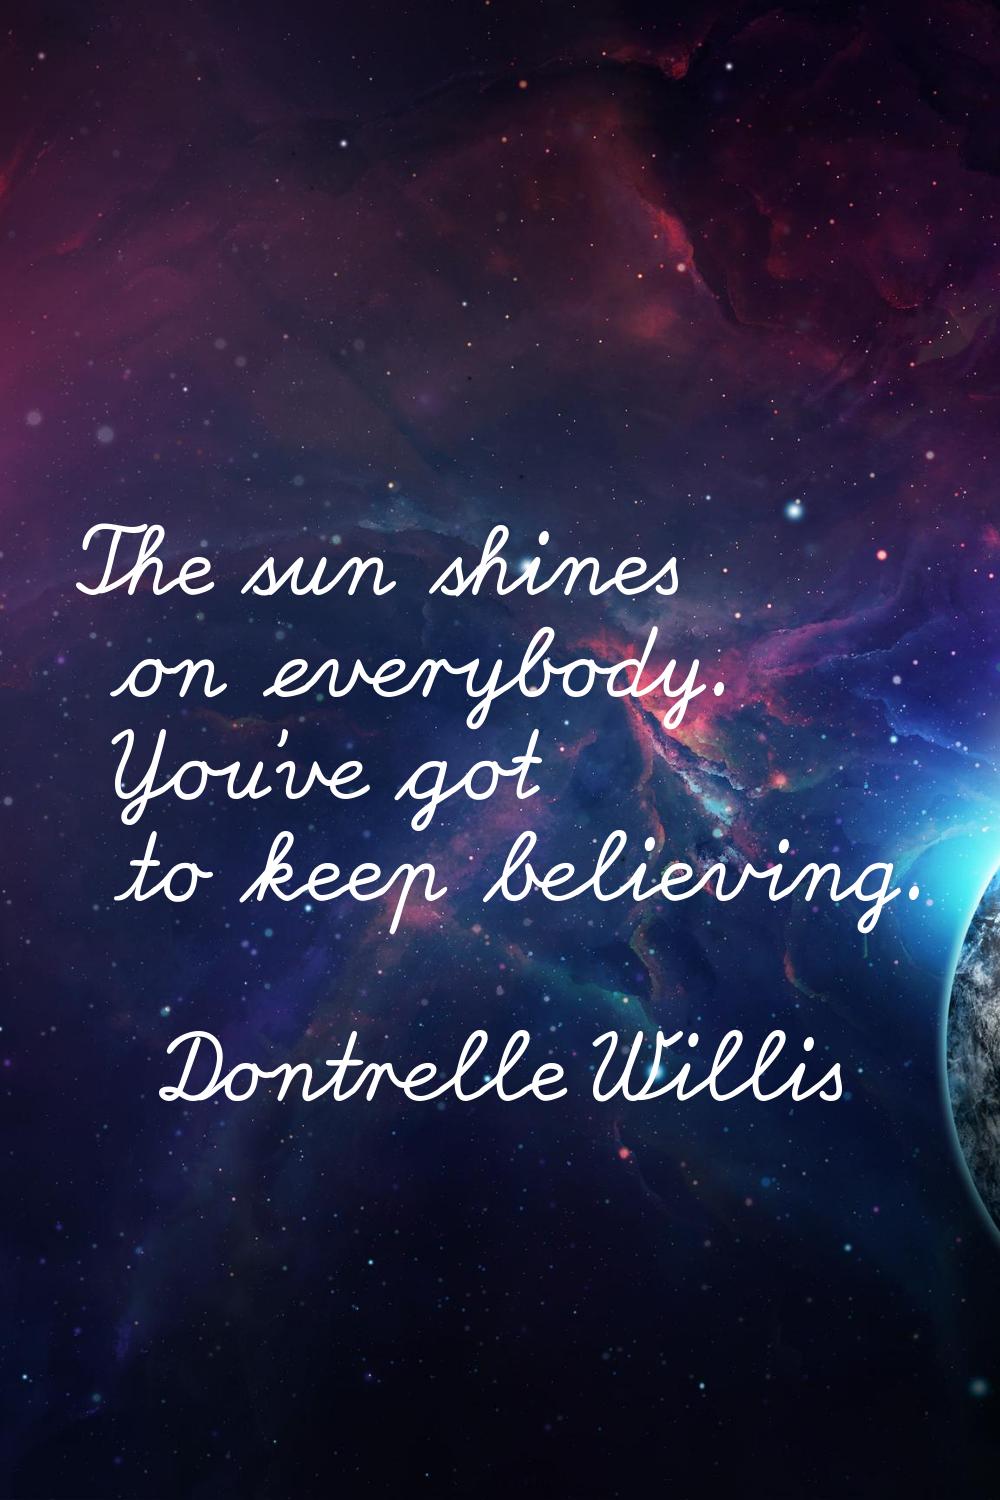 The sun shines on everybody. You've got to keep believing.